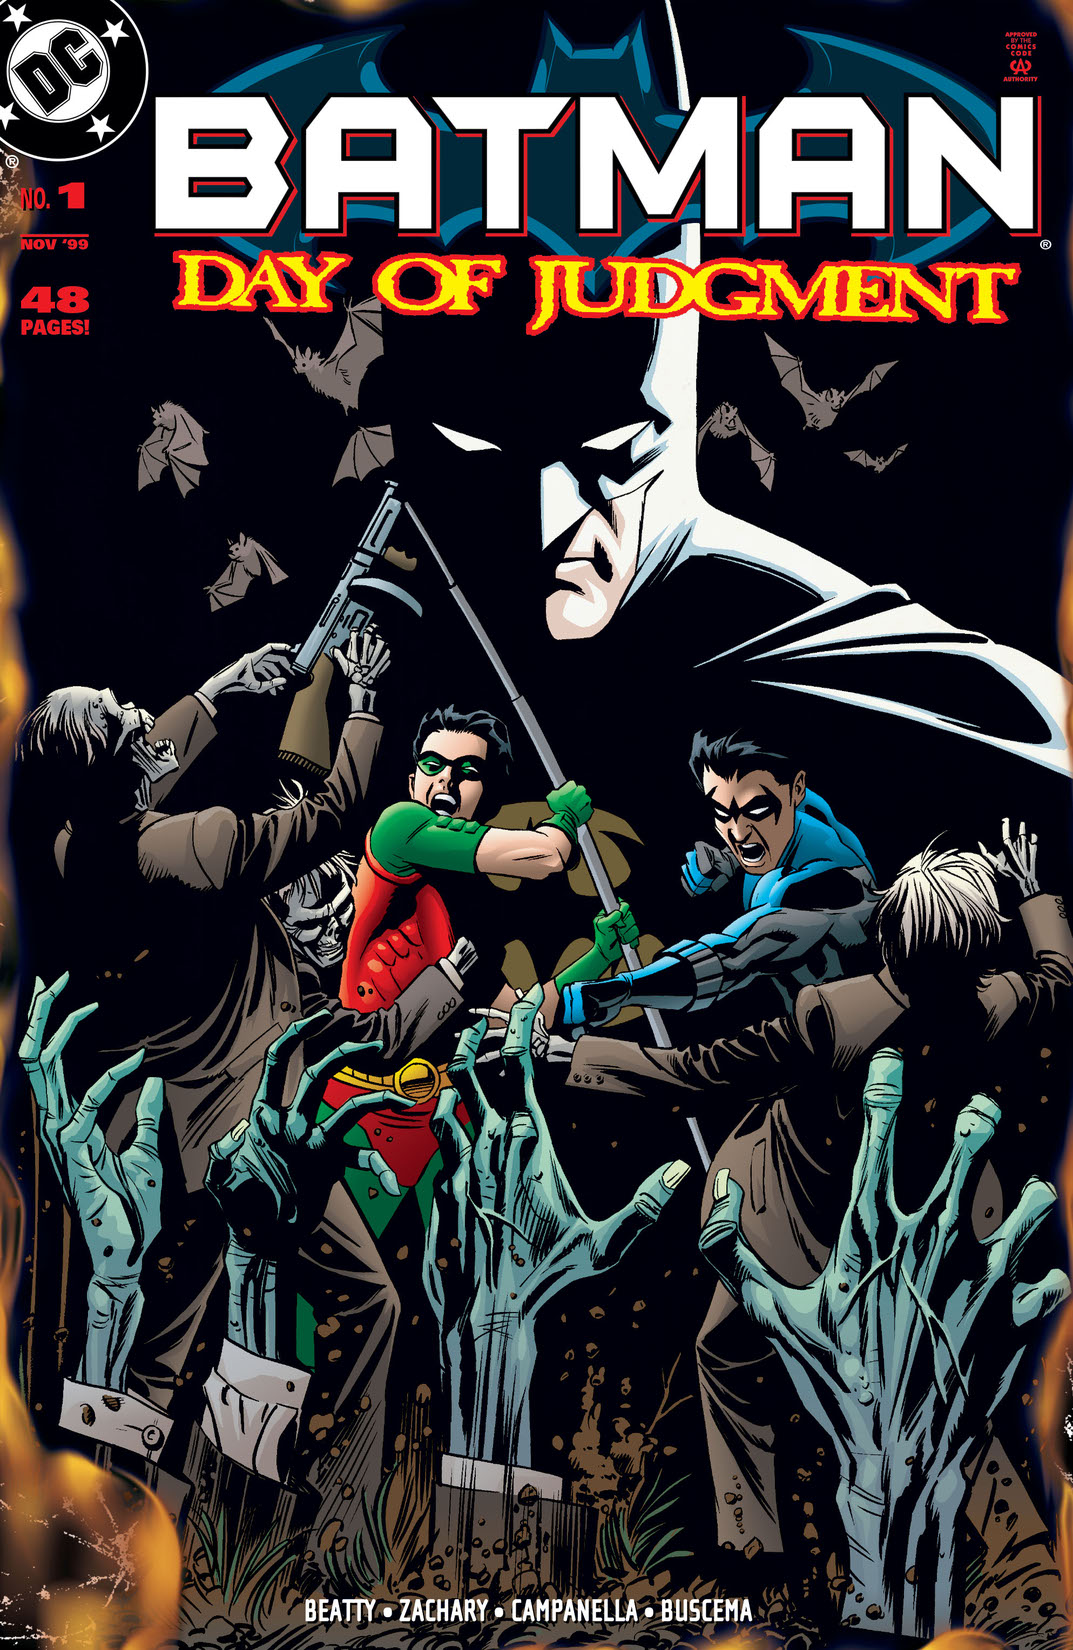 Batman: Day of Judgment (1999-) #1 preview images